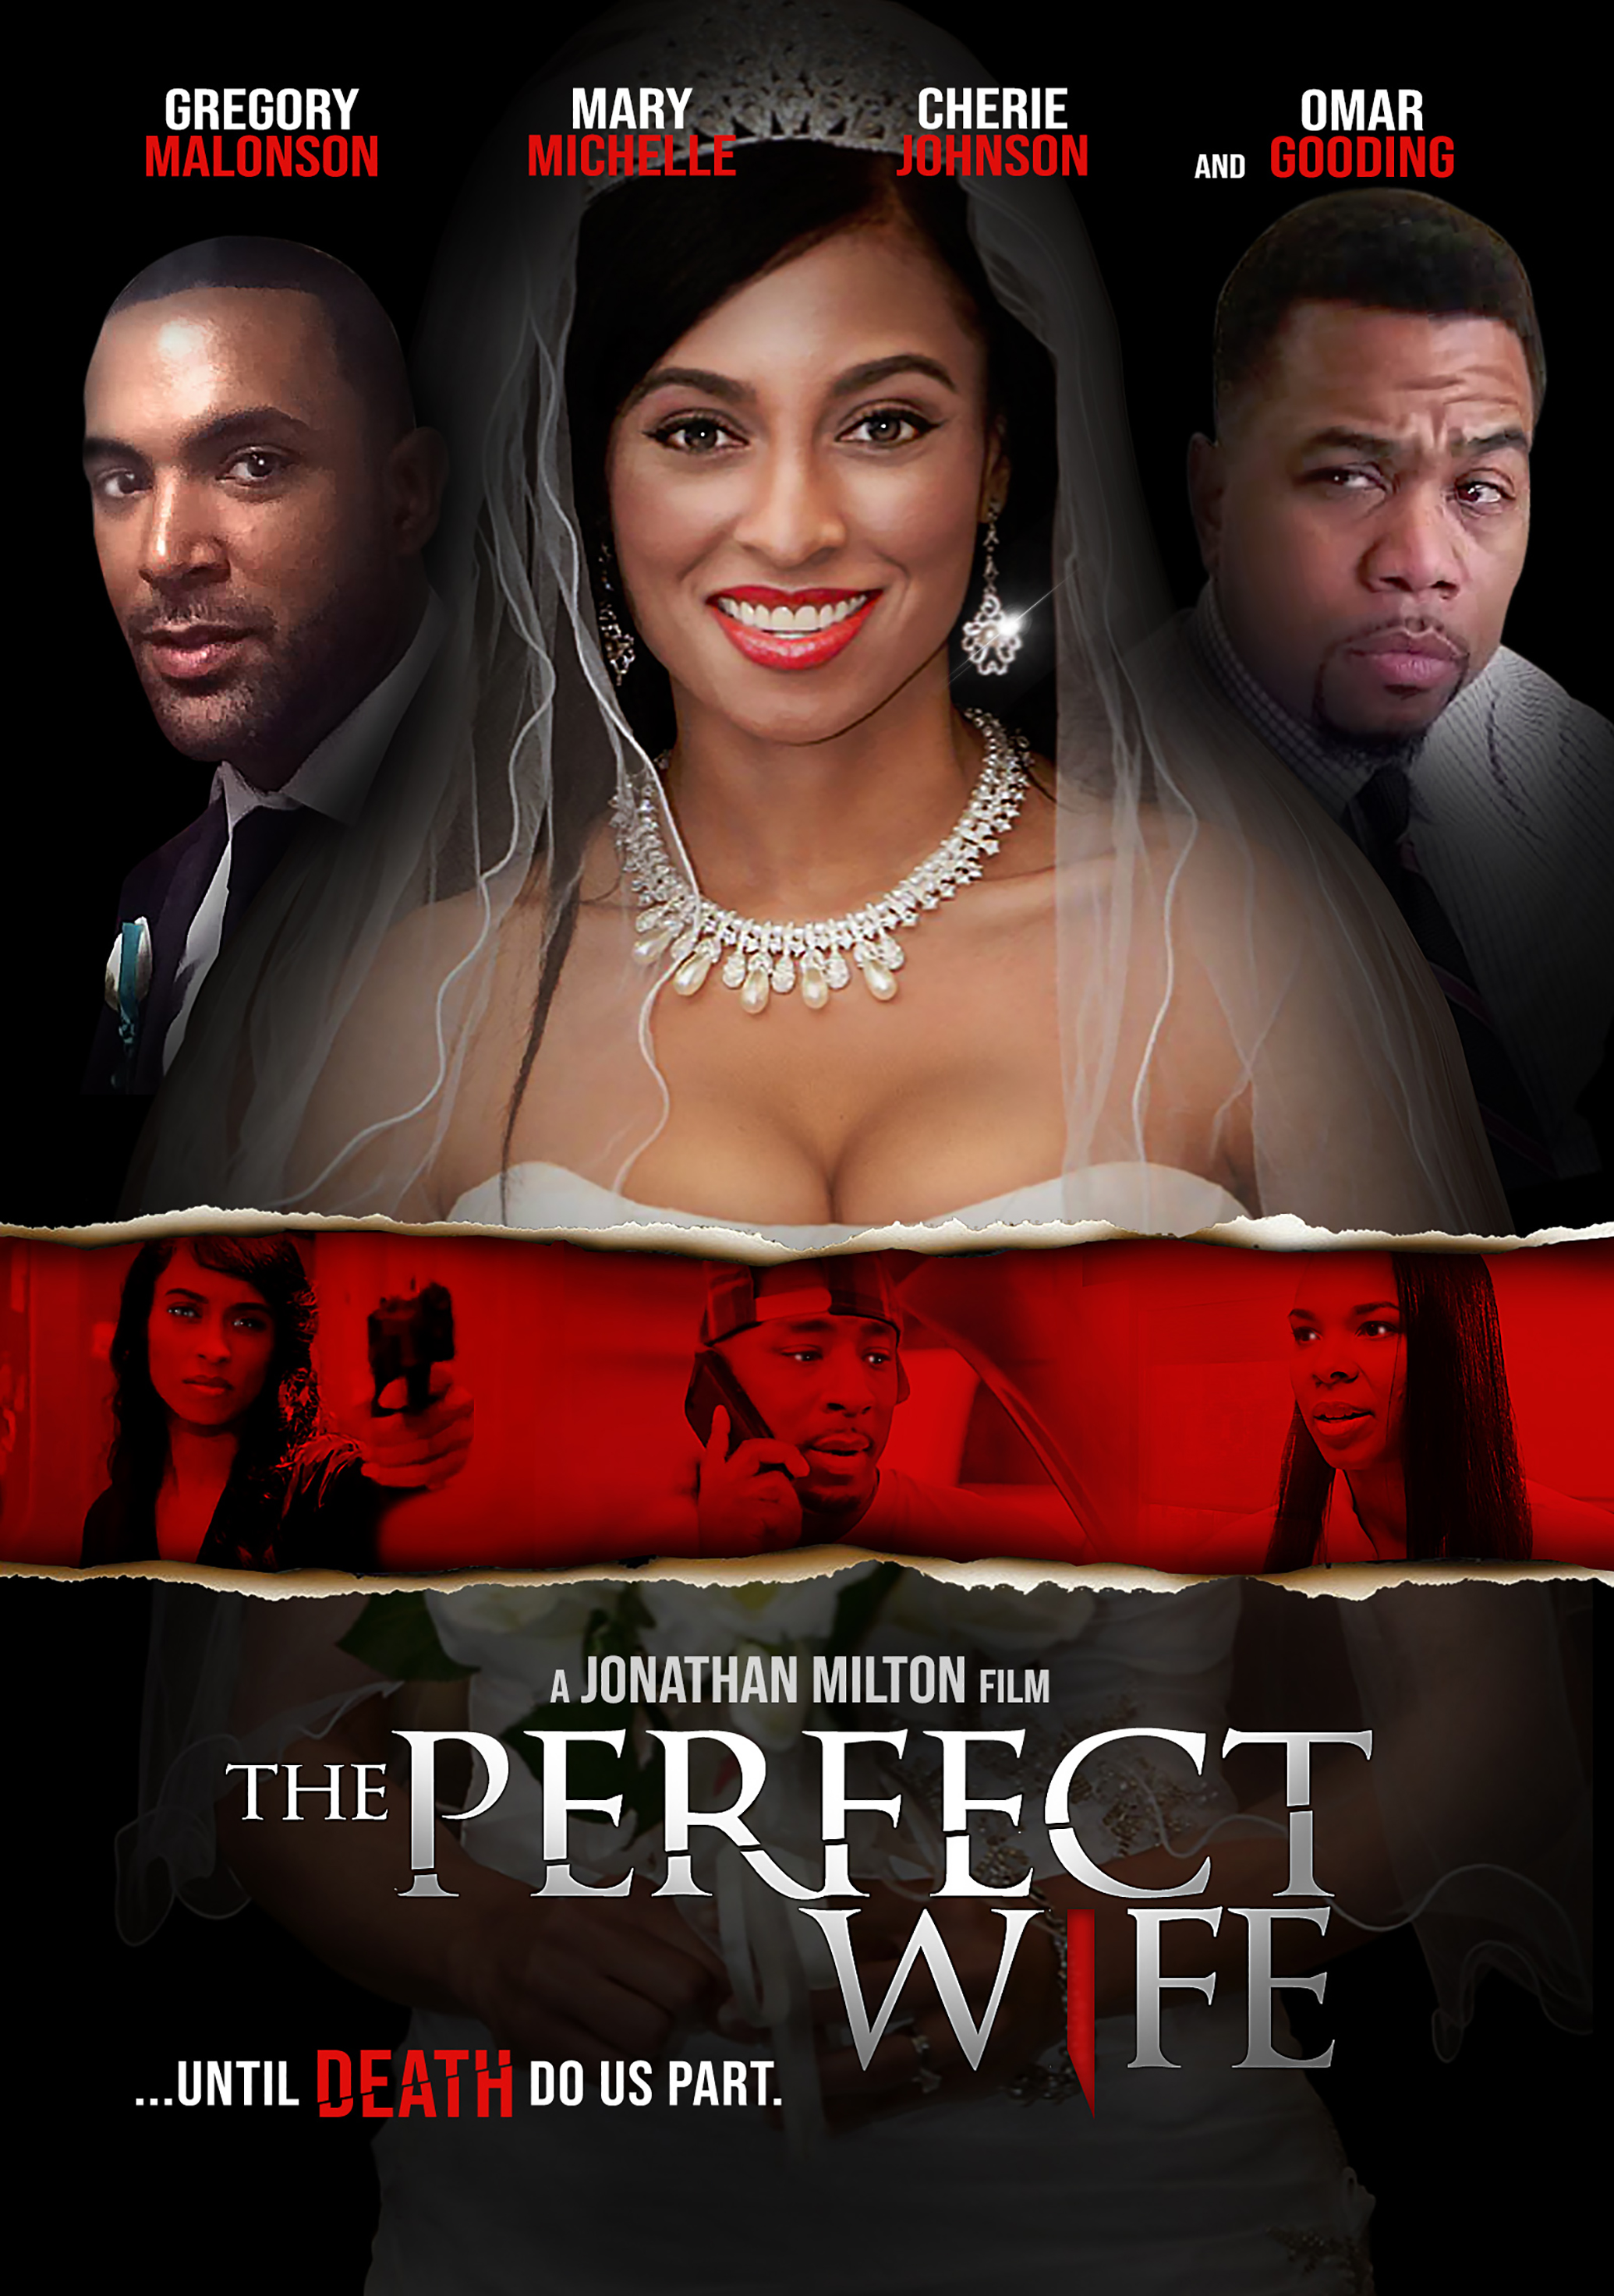 The Perfect Wife (2016) Thriller